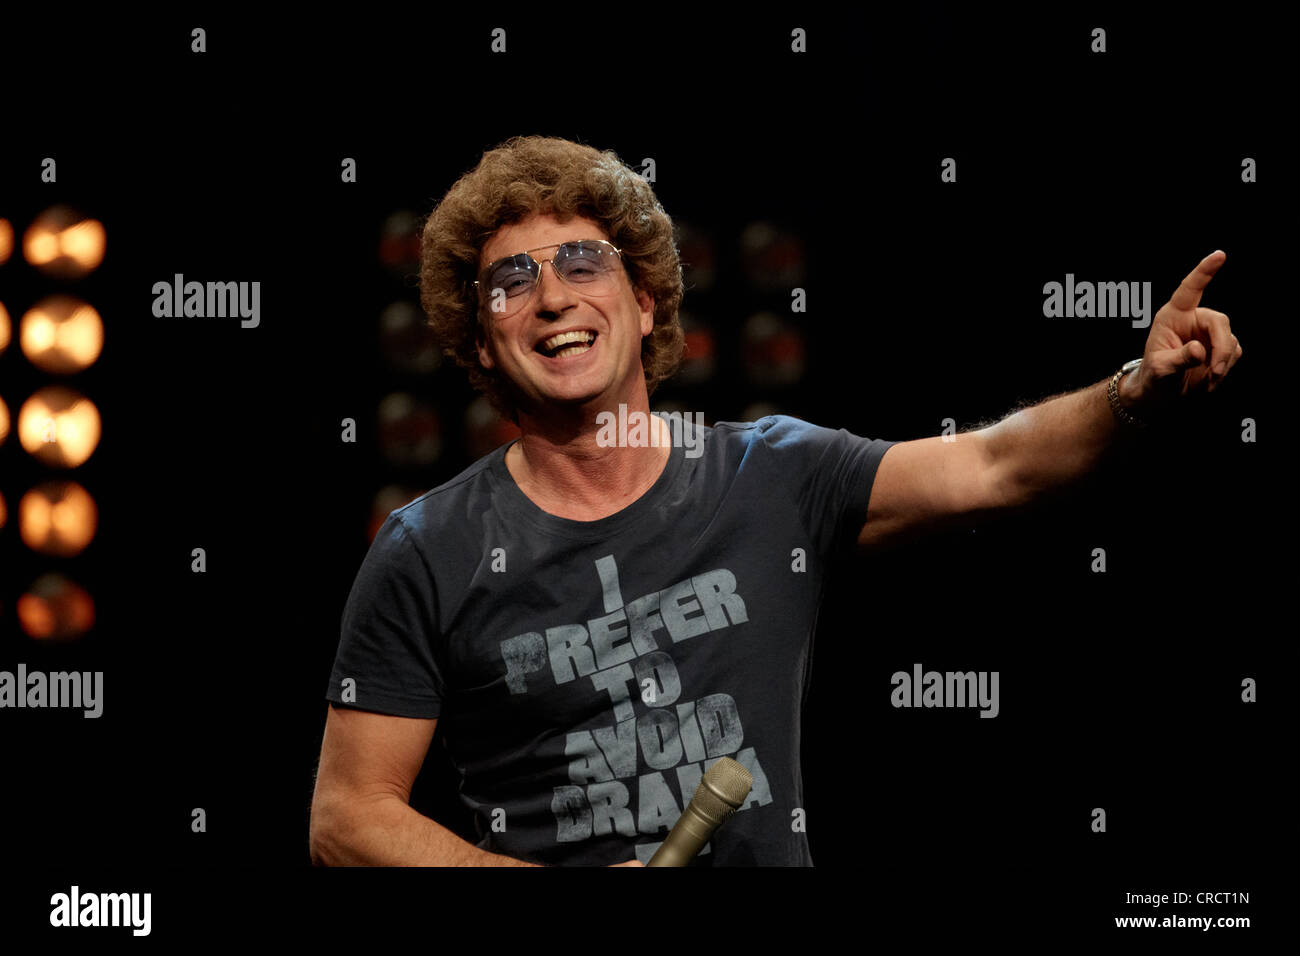 Comedian Atze Schroeder during a show in Koblenz, Rhineland-Palatinate, Germany, Europe Stock Photo